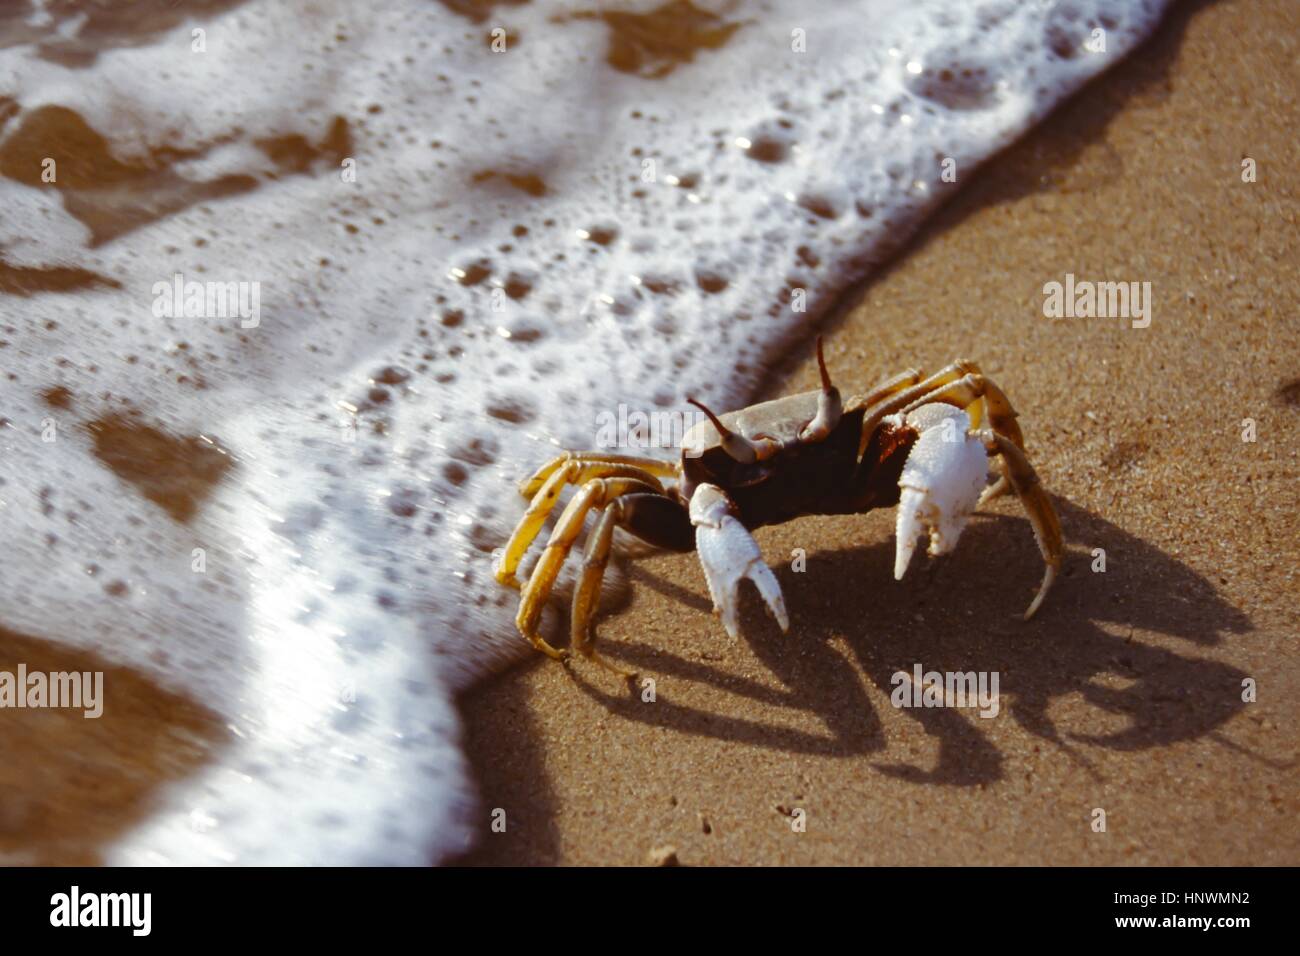 Crab on a sandy beach at the ocean side Stock Photo